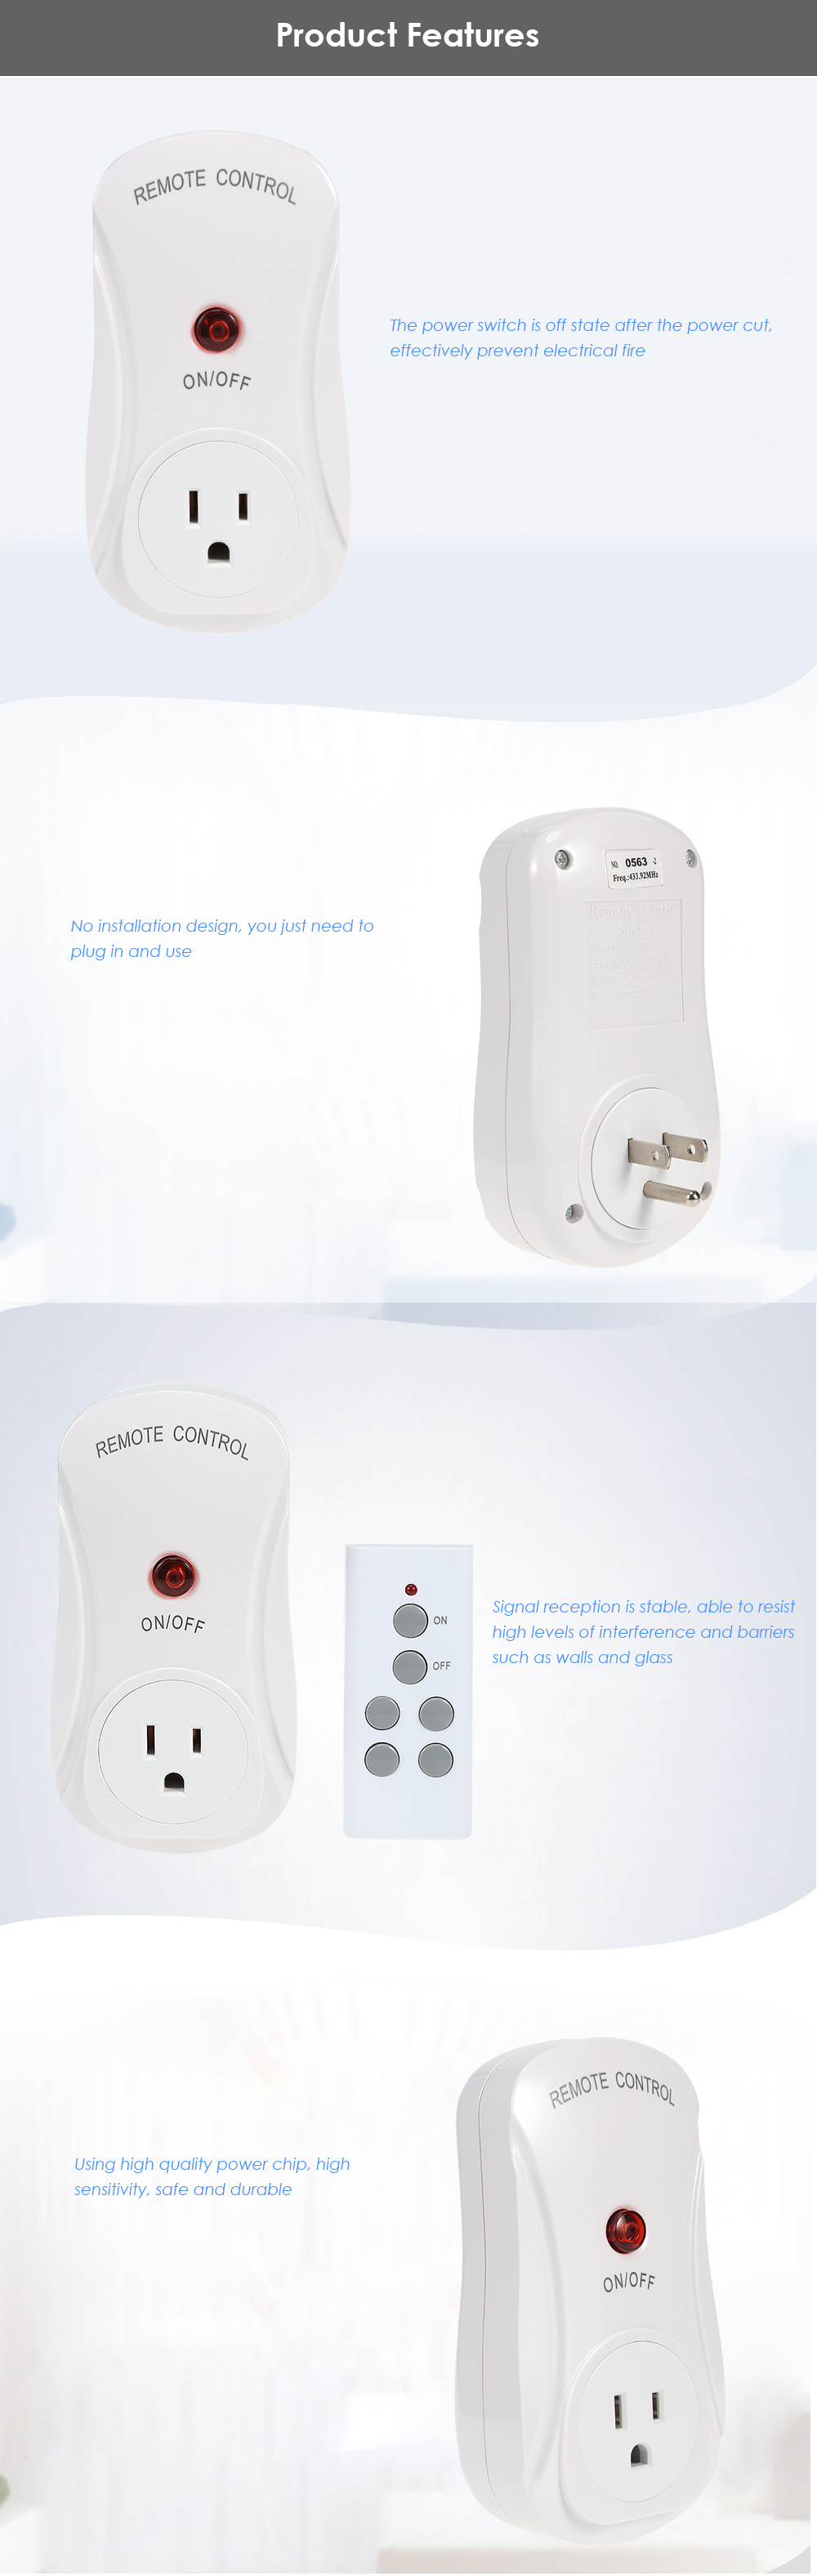 Household Wireless Remote Control Switch Socket